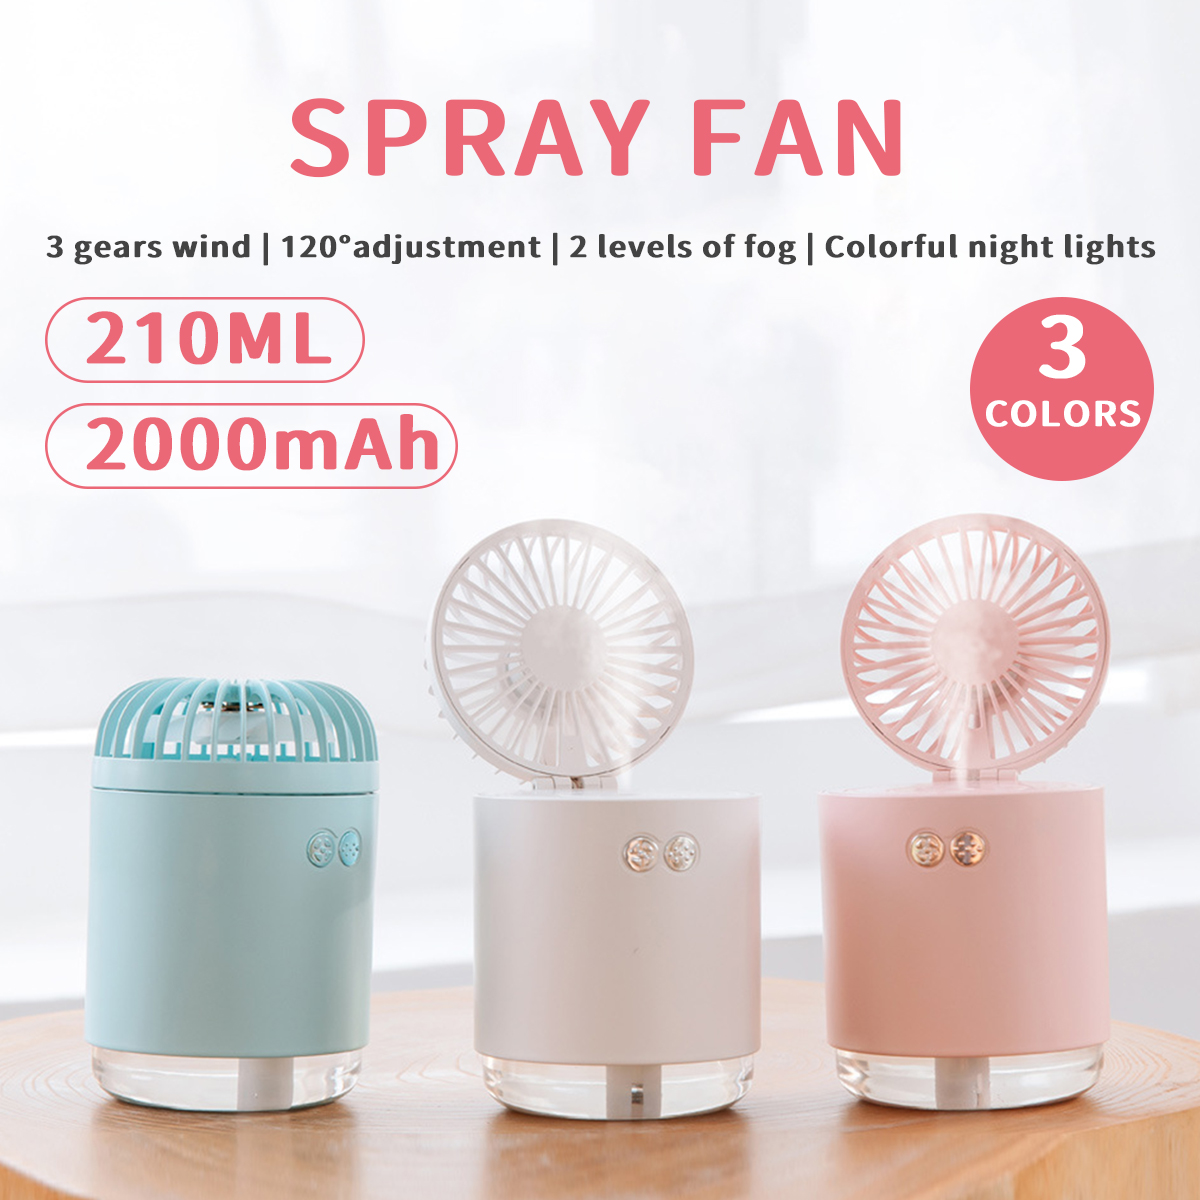 Multifunctional-2000mAh-Mini-USB-Rechargeable-Fan-Cooler-Desktop-Spray-Humidification-with-Colorful--1864518-1